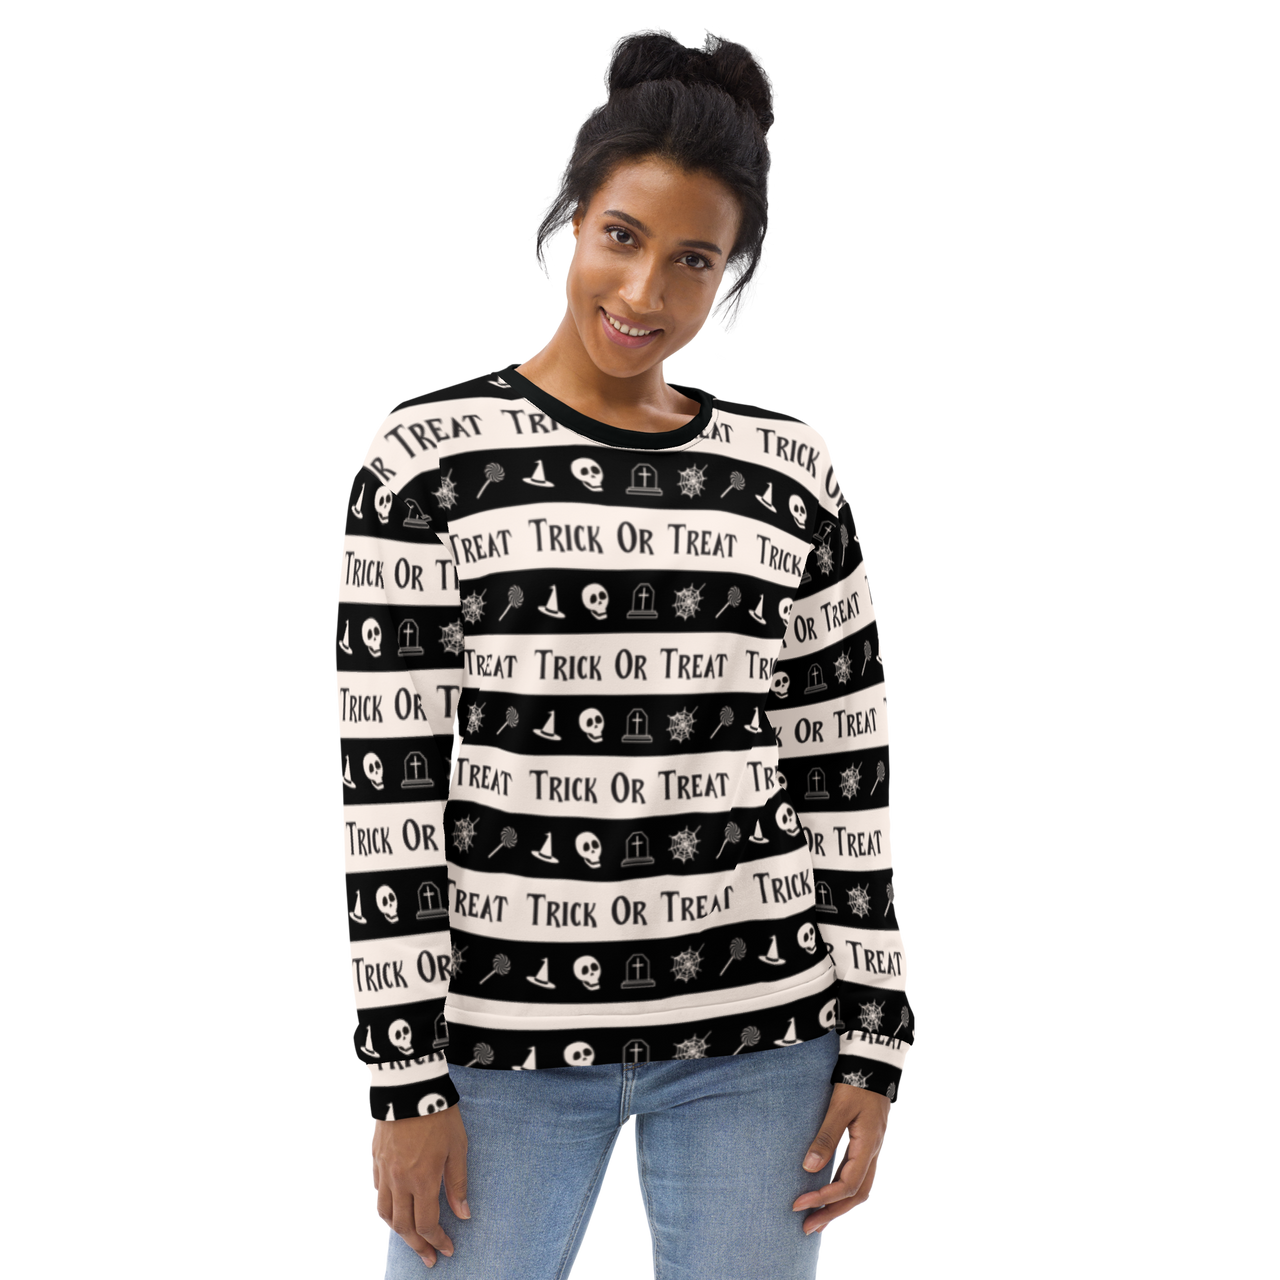 All over Unisex Halloween Sweater - Funny Halloween Sweatshirts - Unisex Halloween Sweatshirt For Halloween/Trick or Treat SHAVA